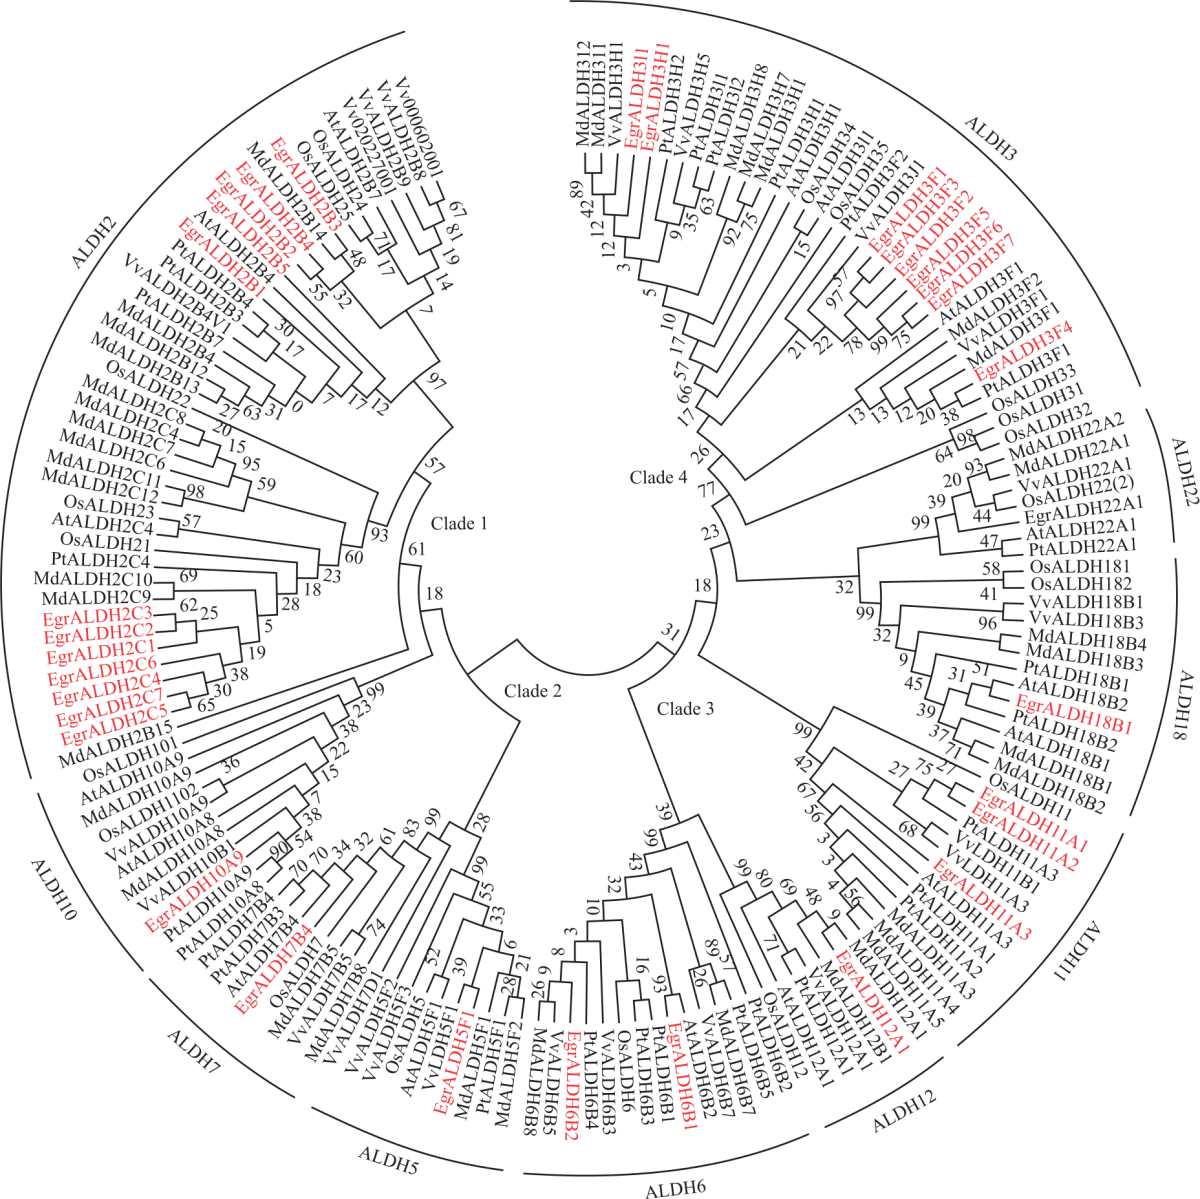 Image for - Genome-wide Analysis of Aldehyde Dehydrogenase (ALDH) Gene Superfamily in Eucalyptus grandis by Using Bioinformatics Methods